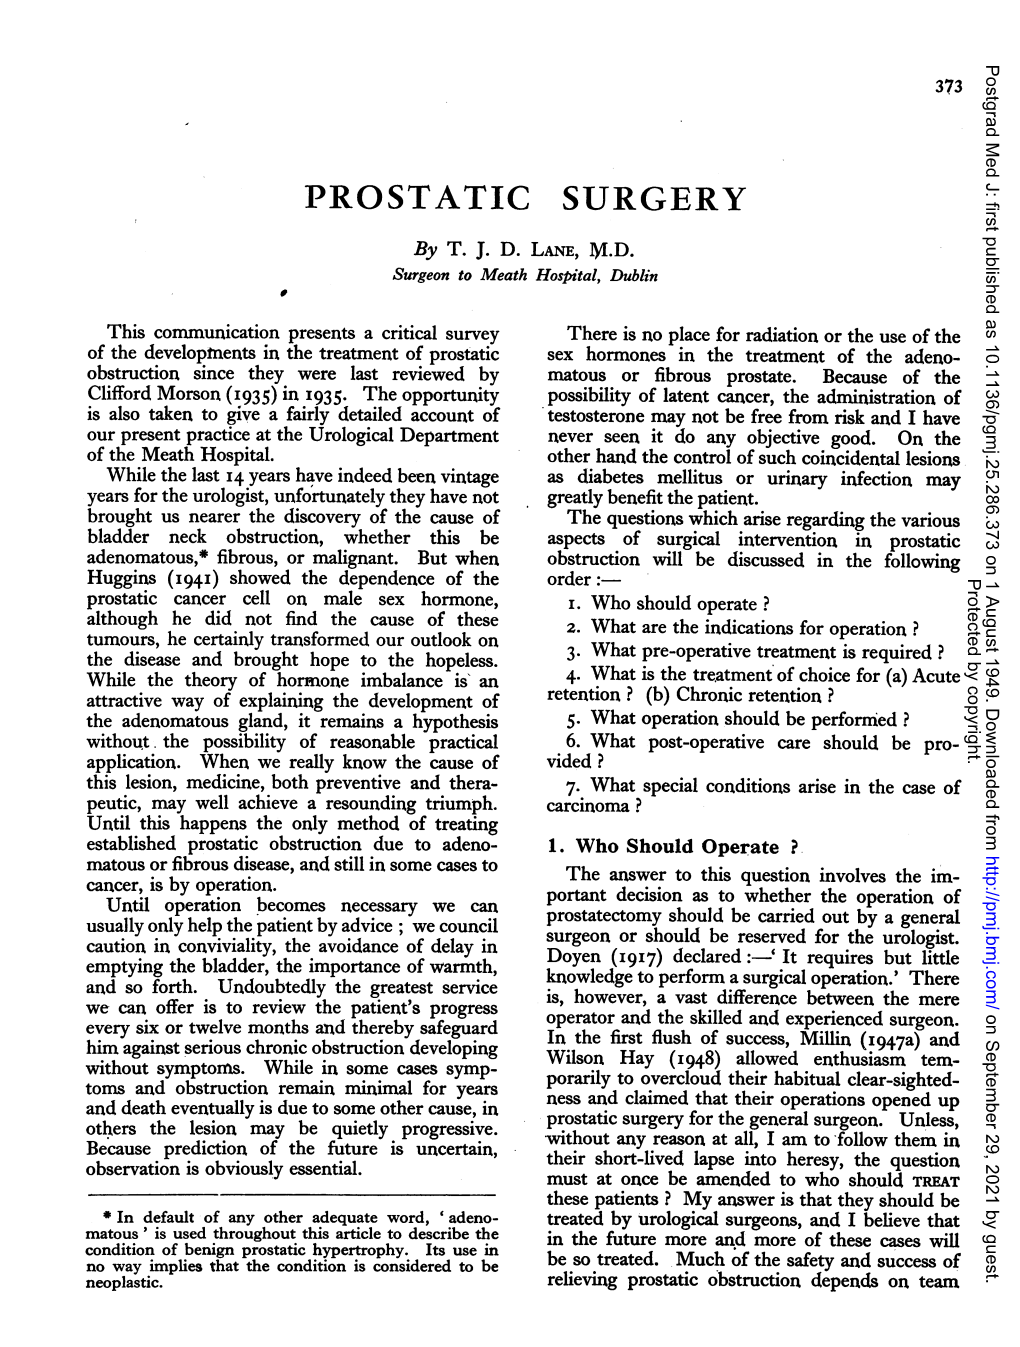 PROSTATIC SURGERY by T